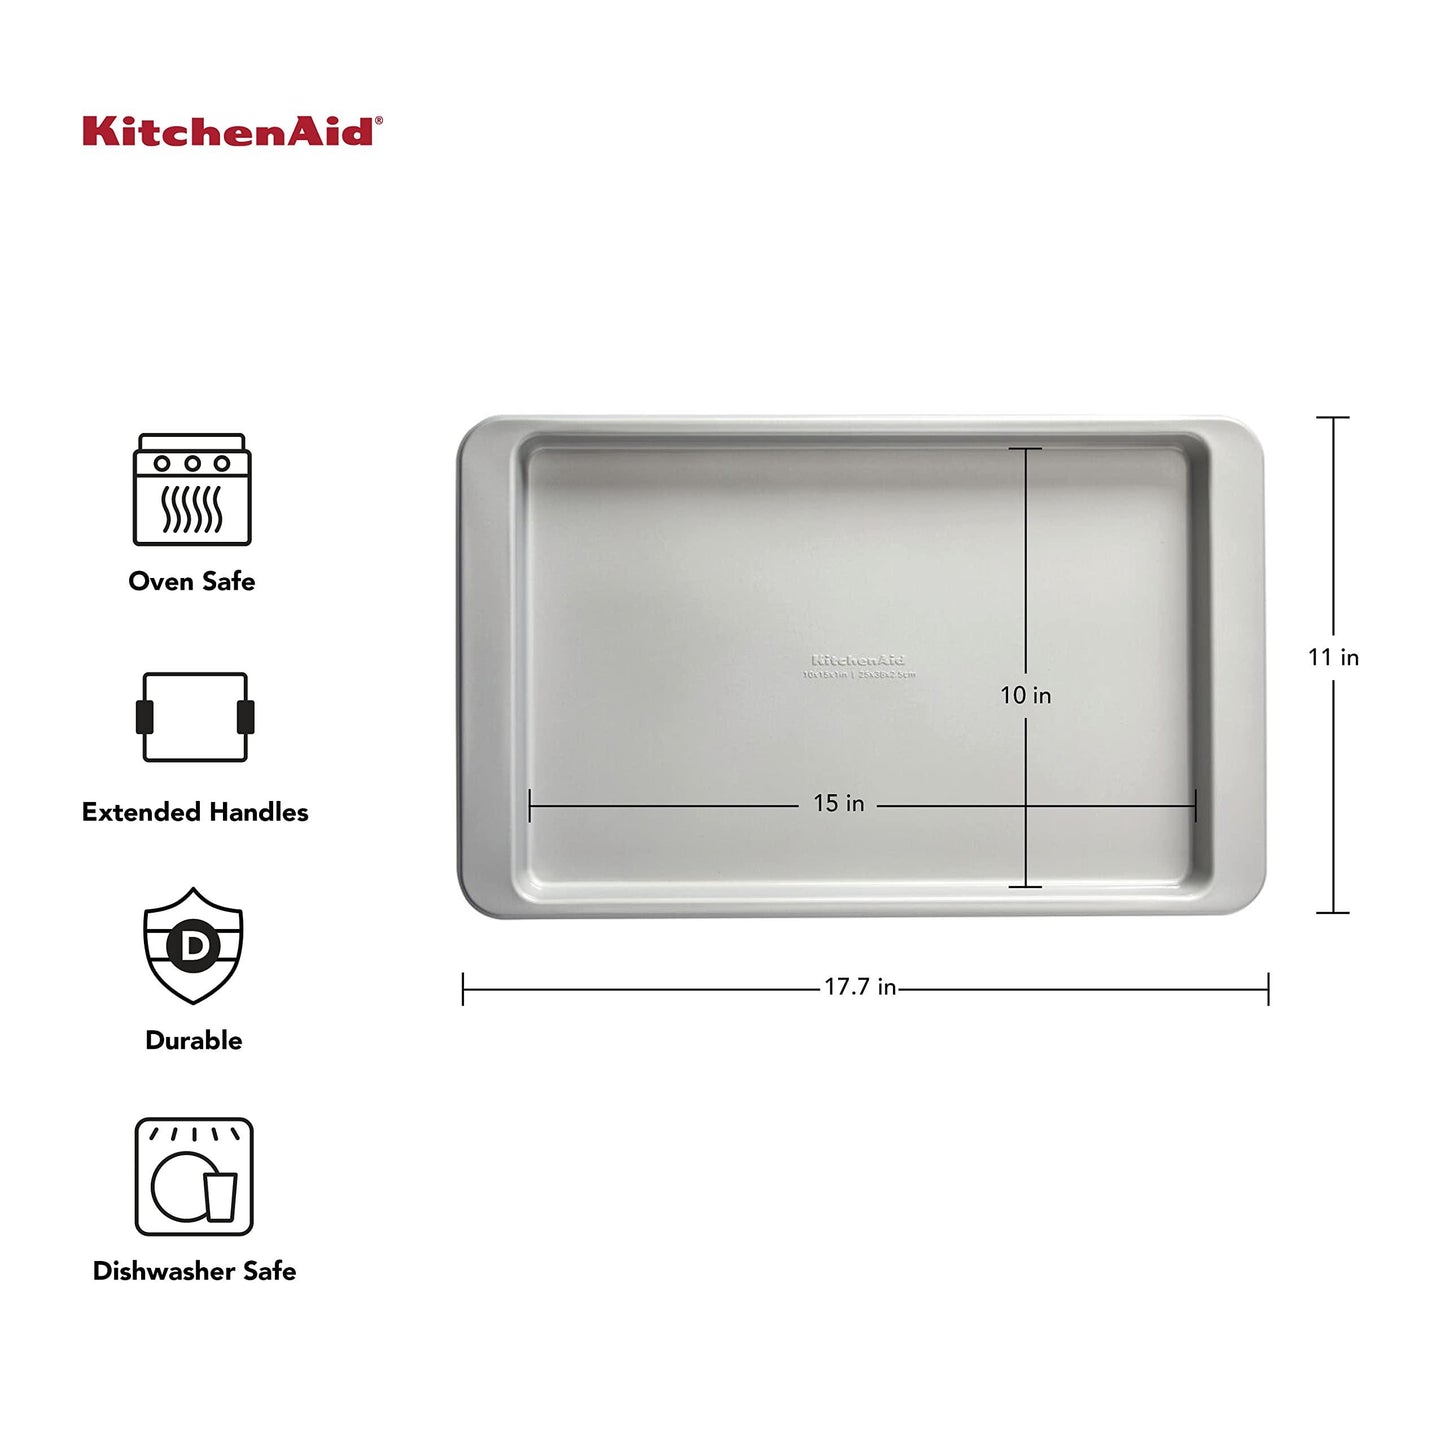 KitchenAid Nonstick Aluminized Steel Baking Sheet, 10x15-Inch, Silver - CookCave